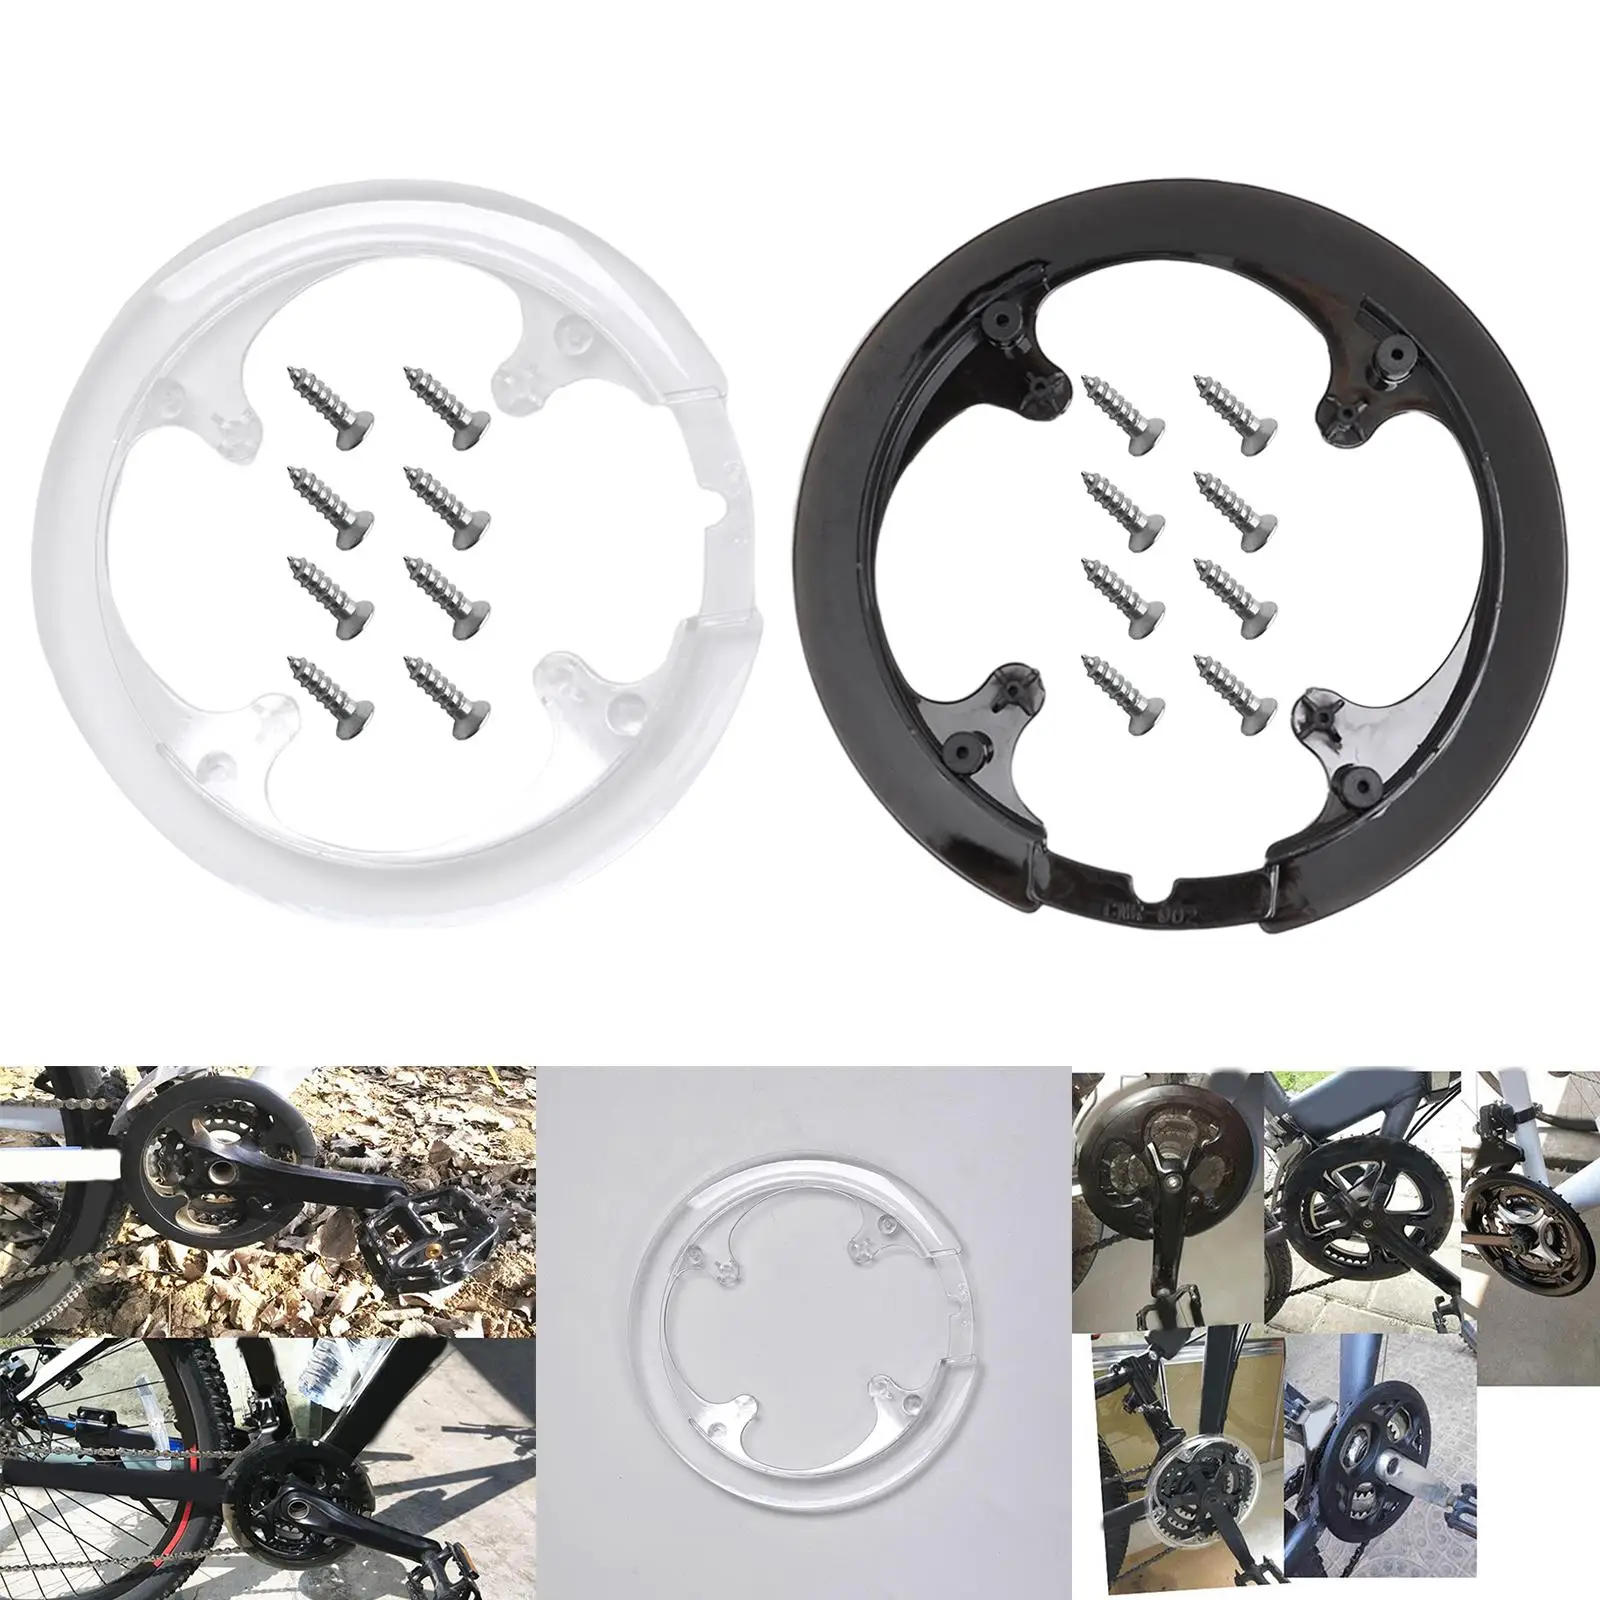 Bike Chainring Guard with Screws Lightweight for Wheel Cover Accessory